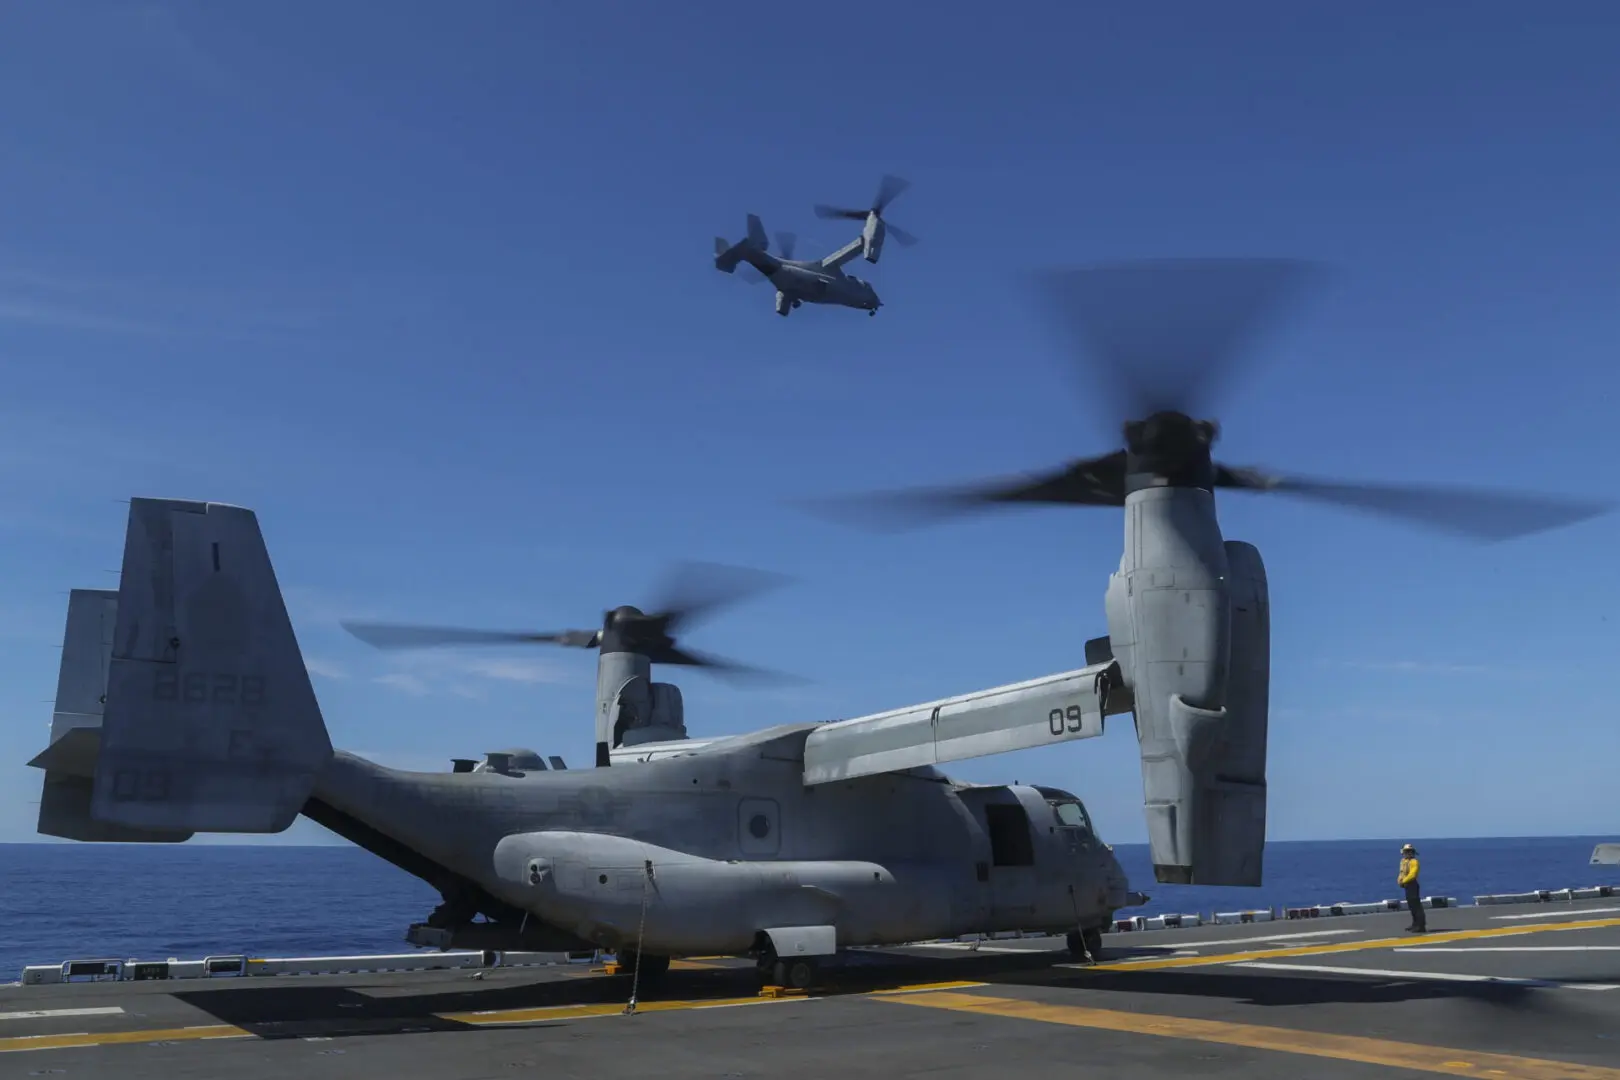 SOUTH CHINA SEA (Oct. 8, 2022) An MV-22 Osprey tiltrotor aircraft assigned to Marine Medium Tiltrotor Squadron (VMM) 262 (Reinforced) flies over the amphibious assault ship USS Tripoli (LHA 7) Oct. 8, 2022. Tripoli is operating in the U.S. 7th Fleet area of operations to enhance interoperability with allies and partners and serve as a ready response force to defend peace and maintain stability in the Indo-Pacific region. (U.S. Navy photo by Mass Communication Specialist 2nd Class Malcolm Kelley)